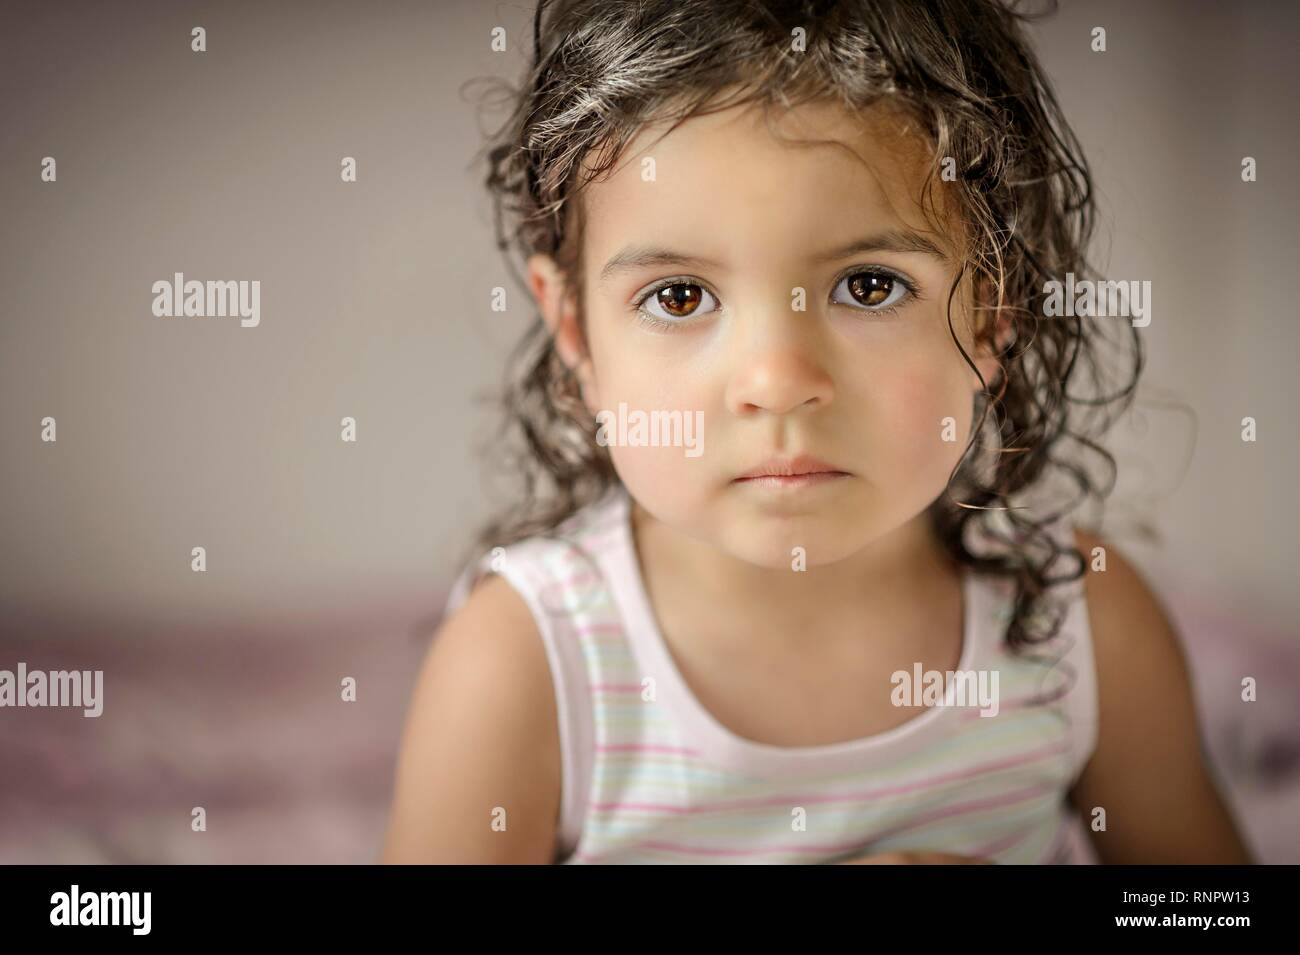 Girl, 3 years, with wet hair, portrait, Germany Stock Photo